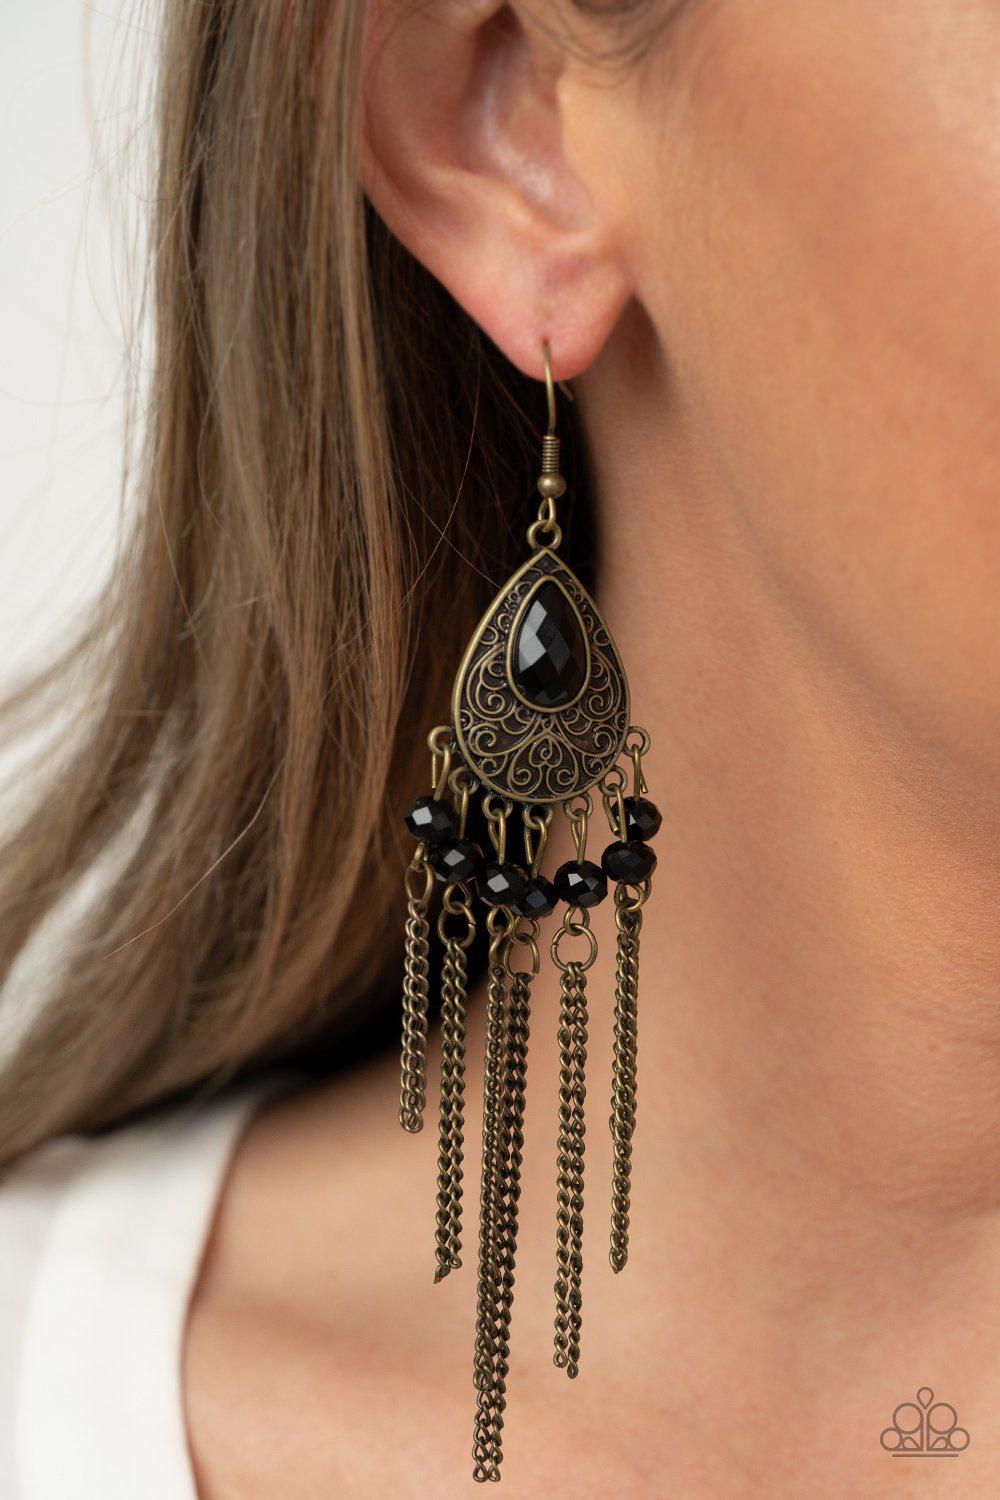 Floating on HEIR Brass and Black Fringe Earrings - Paparazzi Accessories- model - CarasShop.com - $5 Jewelry by Cara Jewels